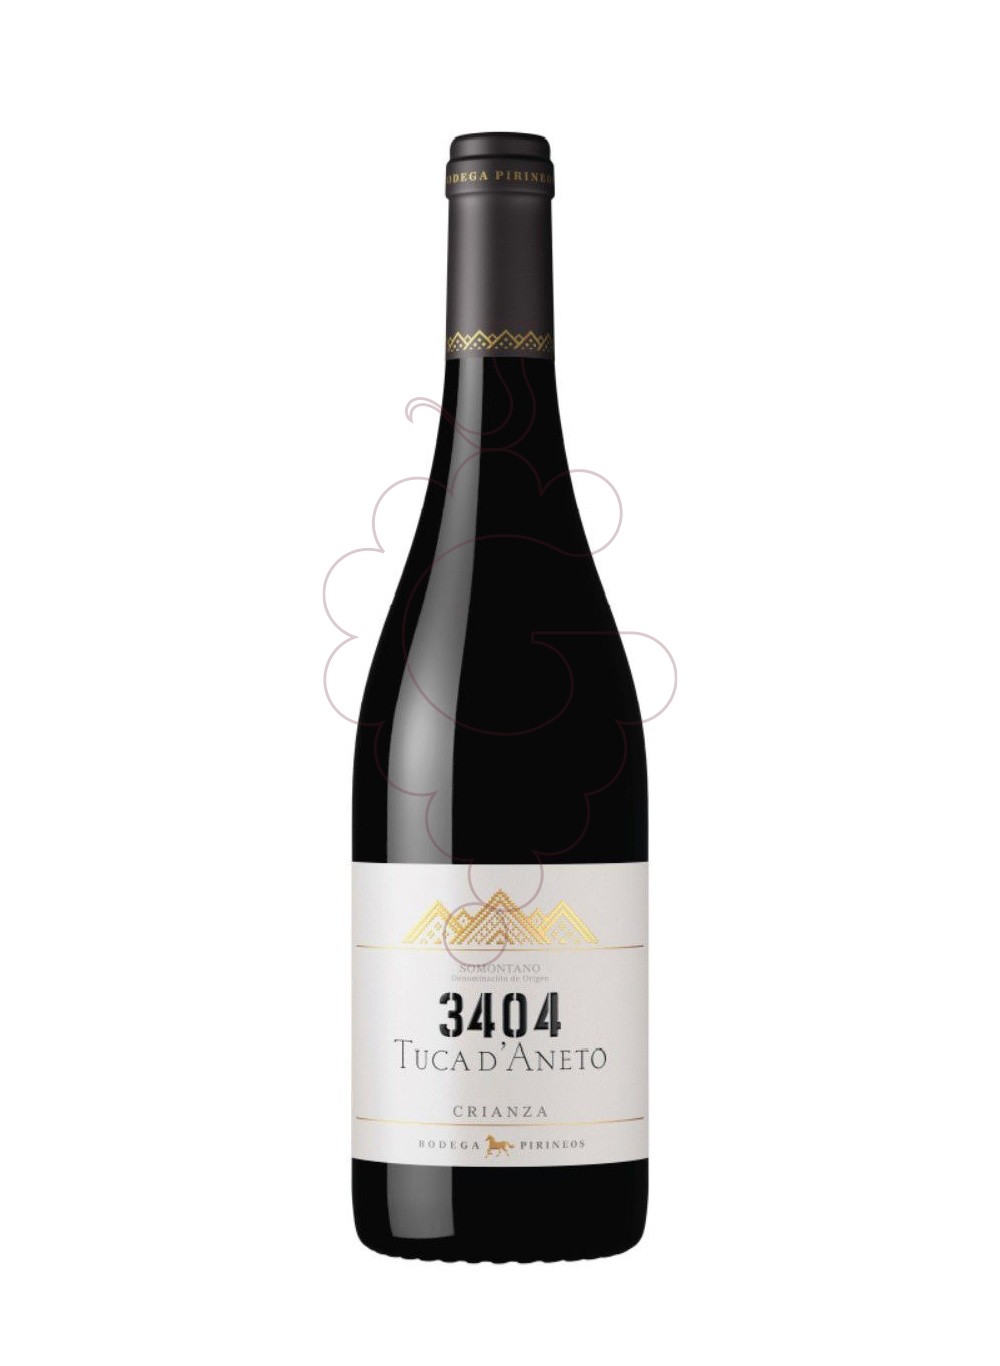 Photo 3404 tuca d'aneto cr. 2019 vin rouge